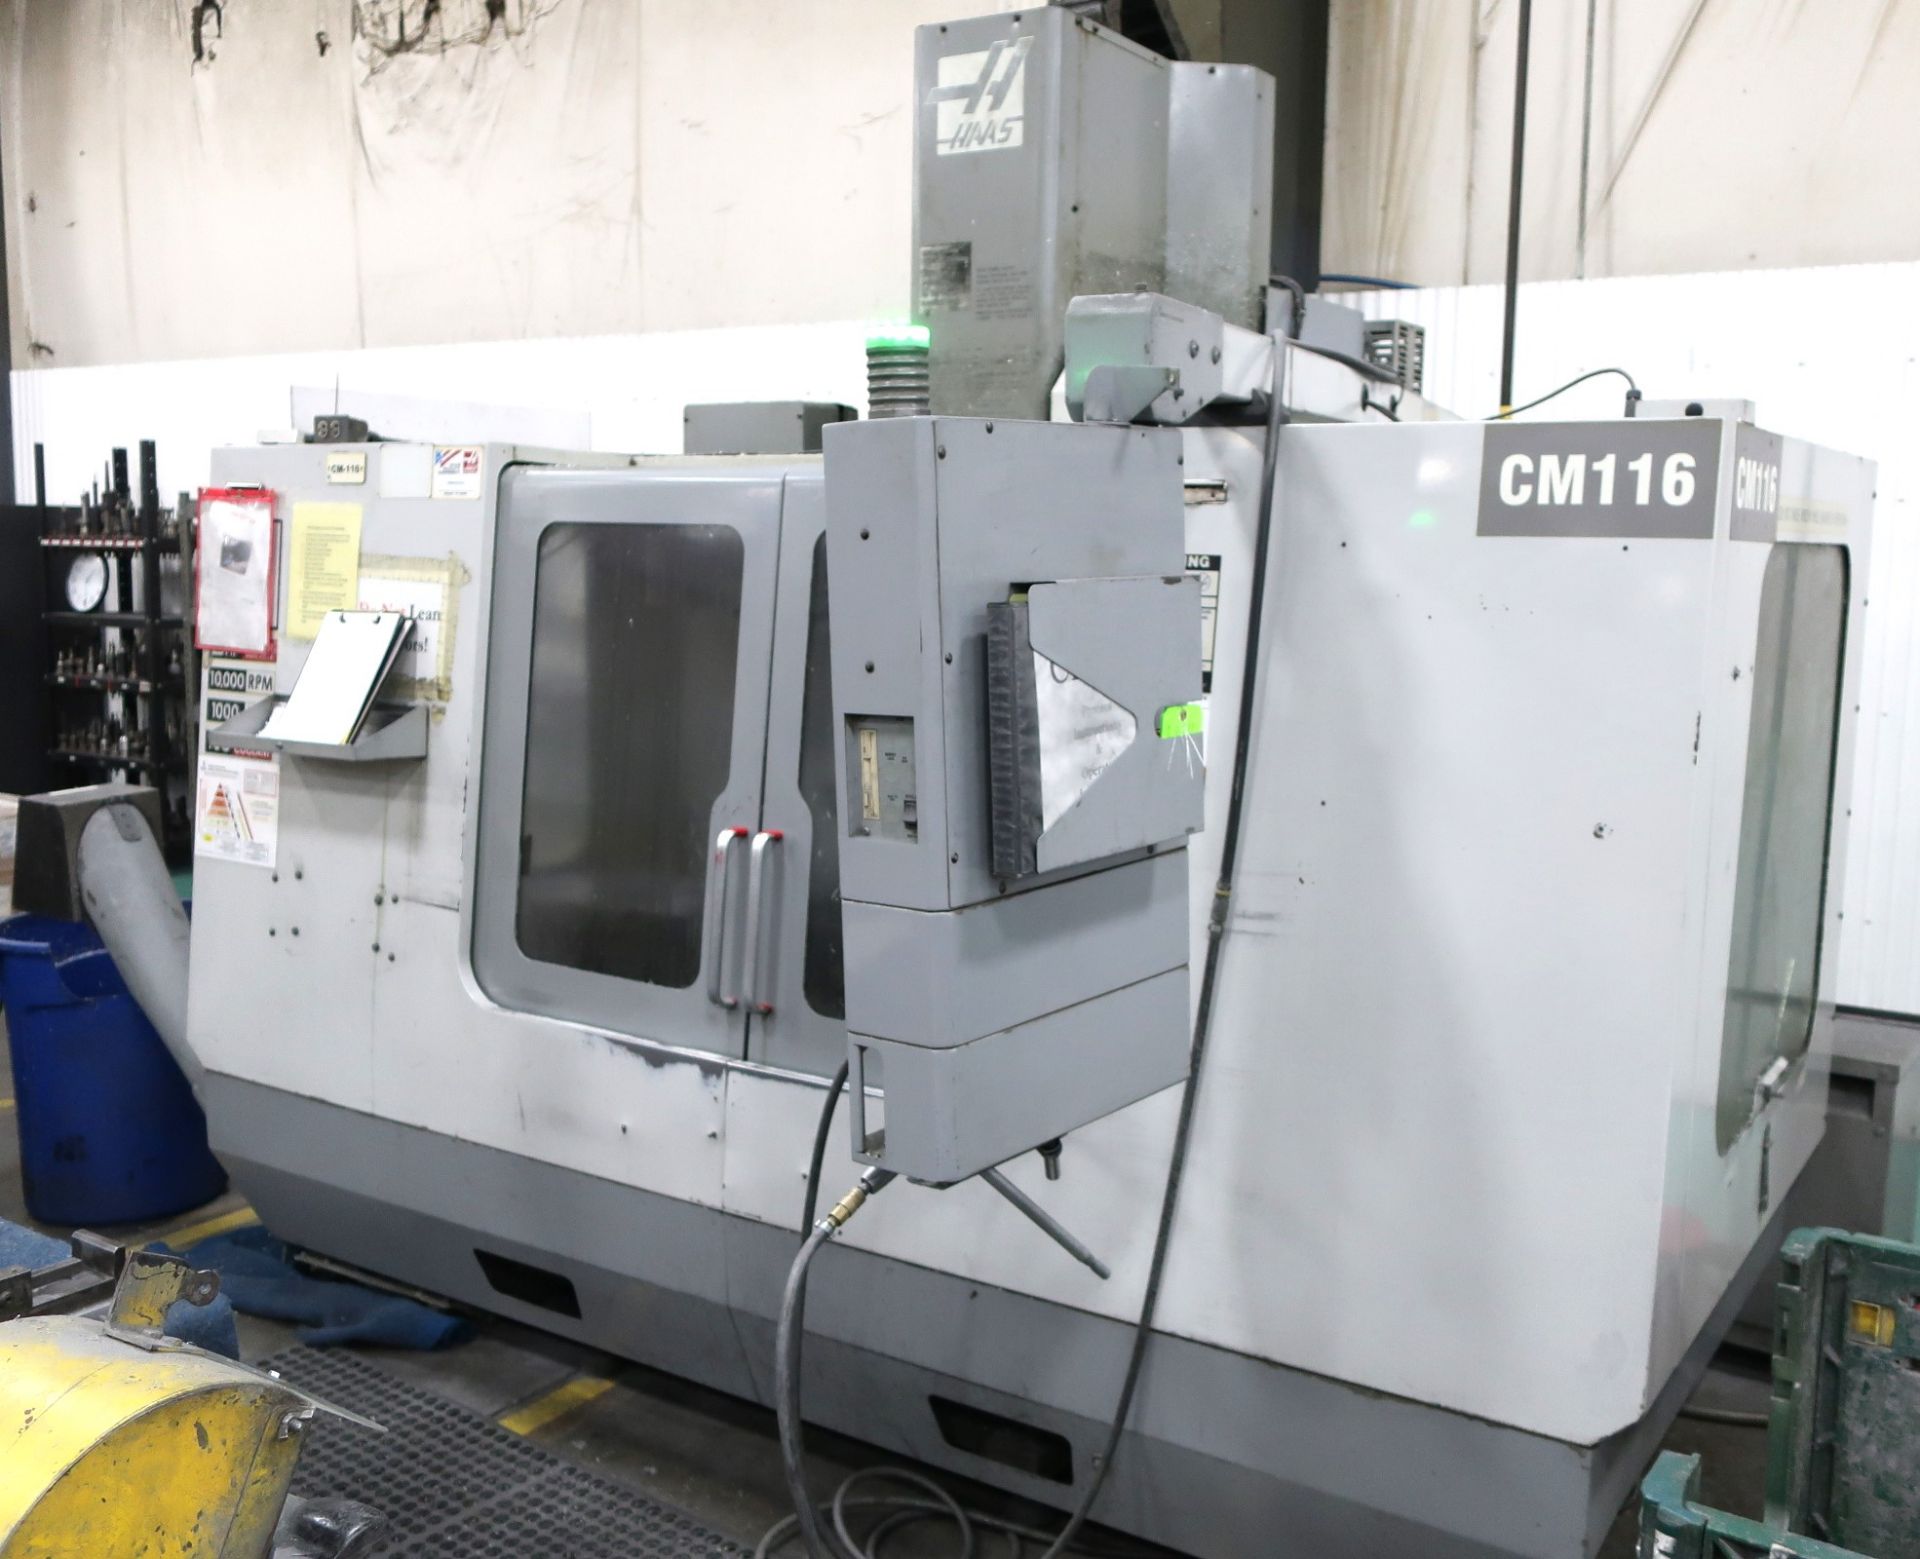 HAAS MODEL VF-3 CNC VERTICAL MACHINING CENTER, NEW 2005 - Image 21 of 21